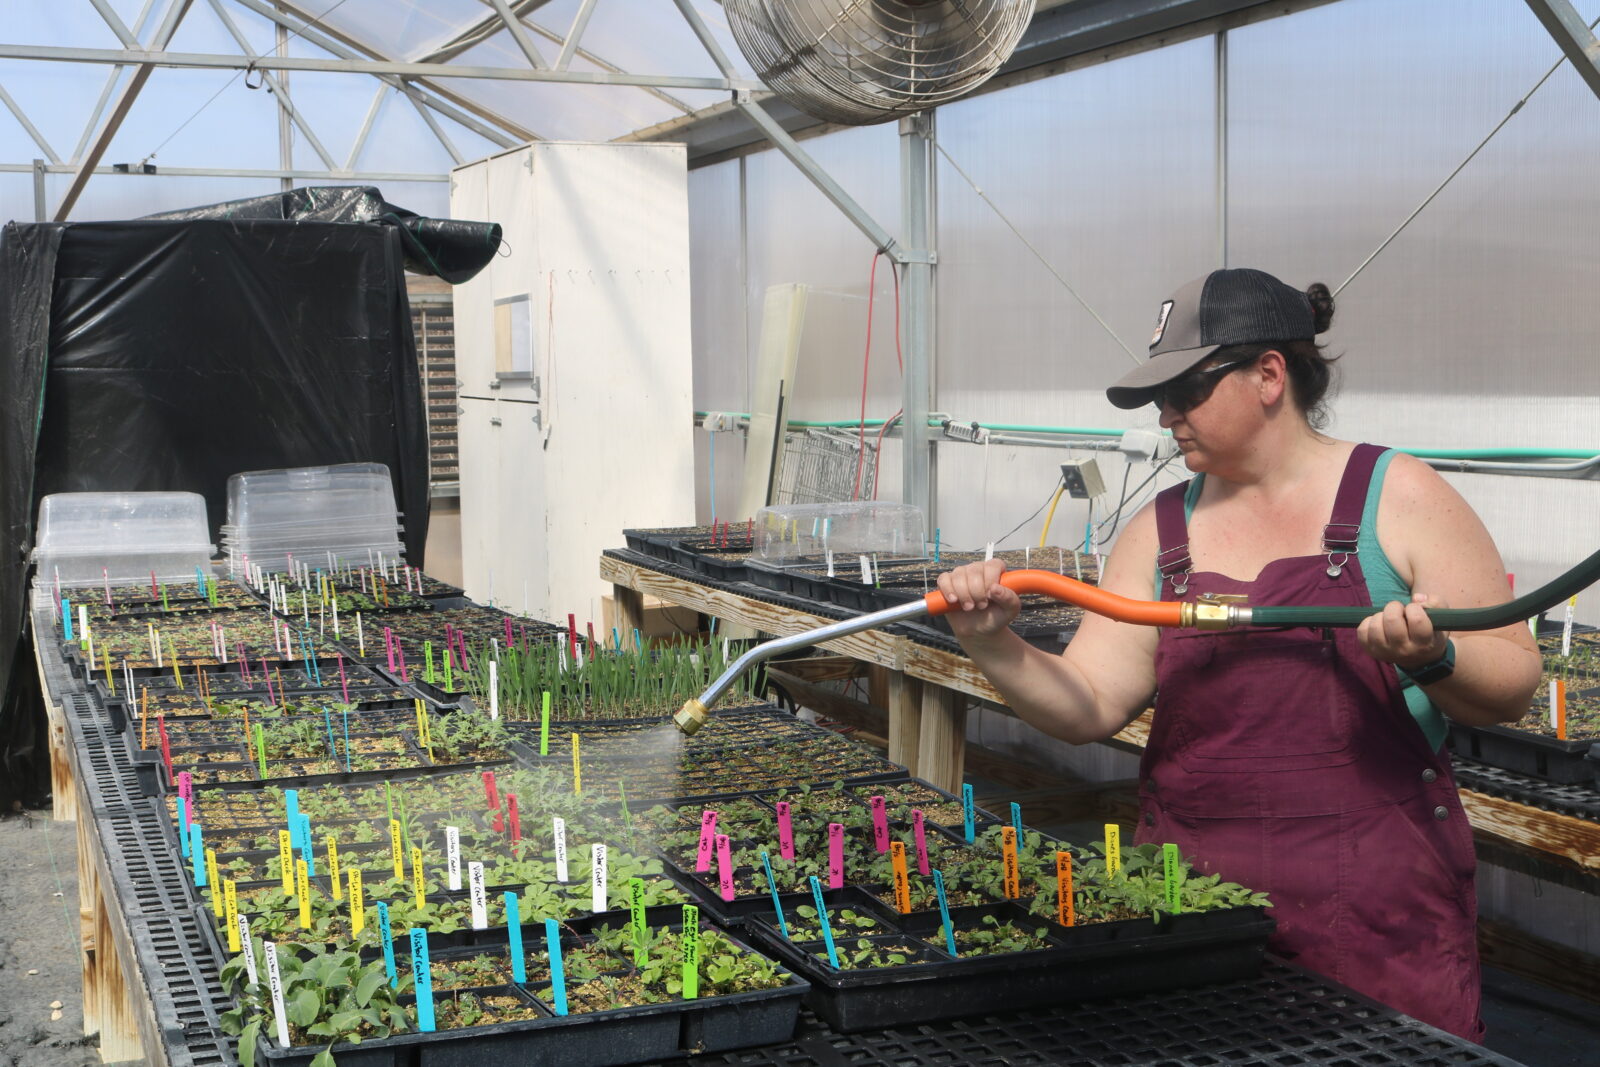 A woman in overalls and a baseball hat waters seedlings in a greenhouse.